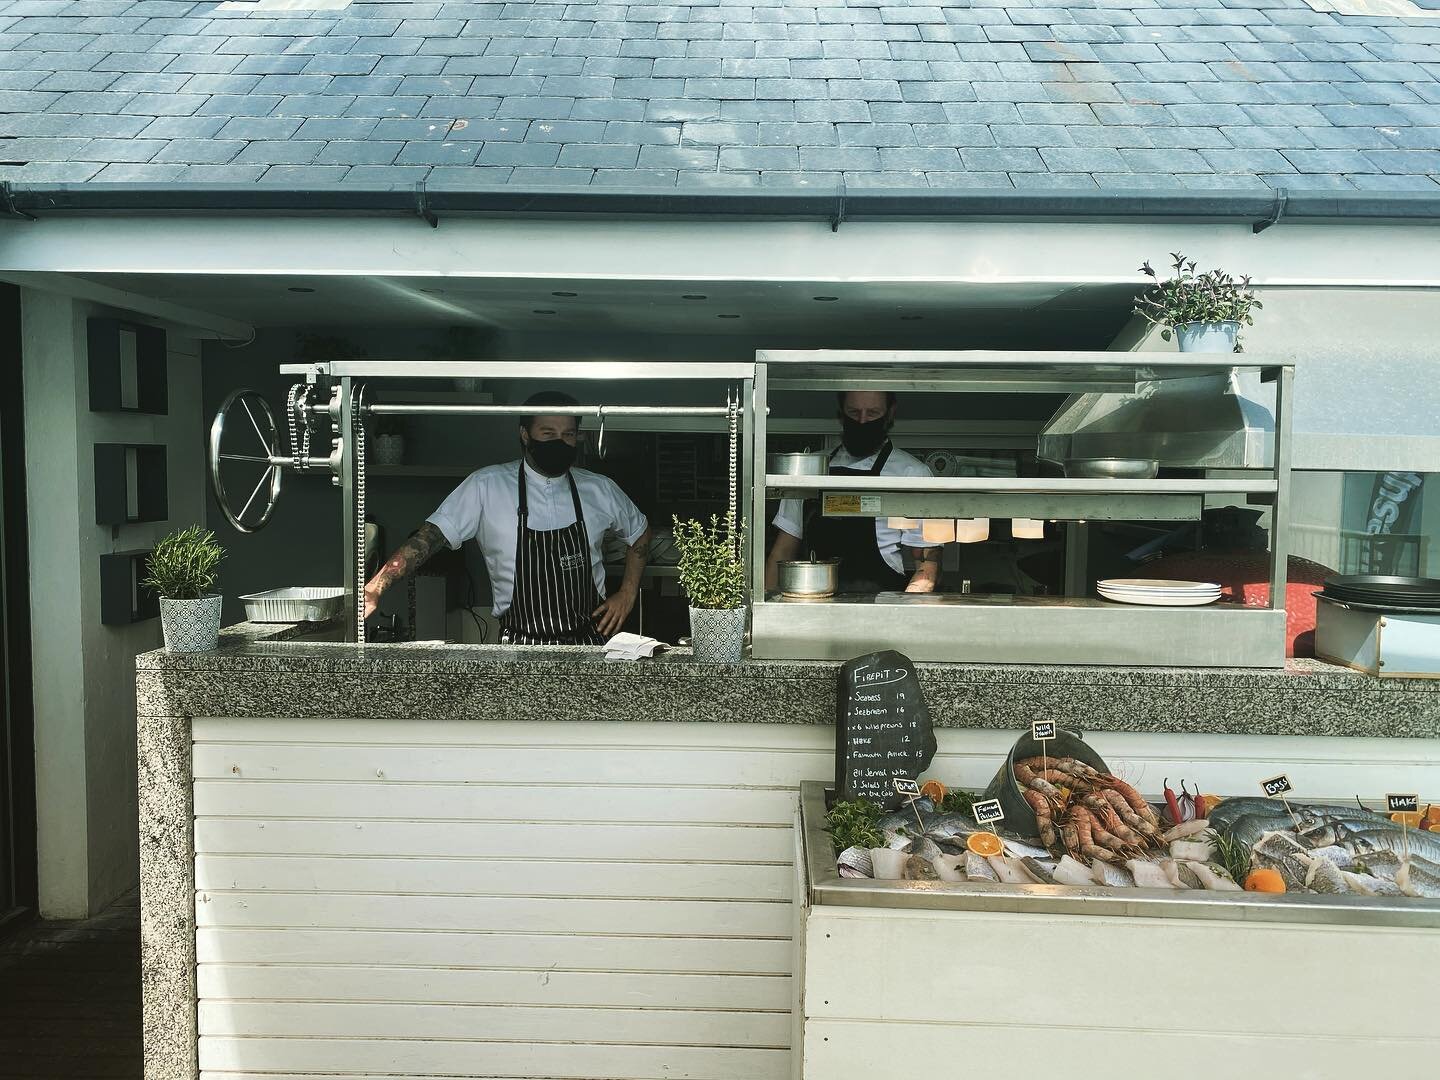 Gylly Beach Team needs you!

There are various positions available in our Kitchen looking for line cooks and short order cooks. Experience is ESSENTIAL for every role, with a passion for locally sourced produce and working in a professional kitchen.
